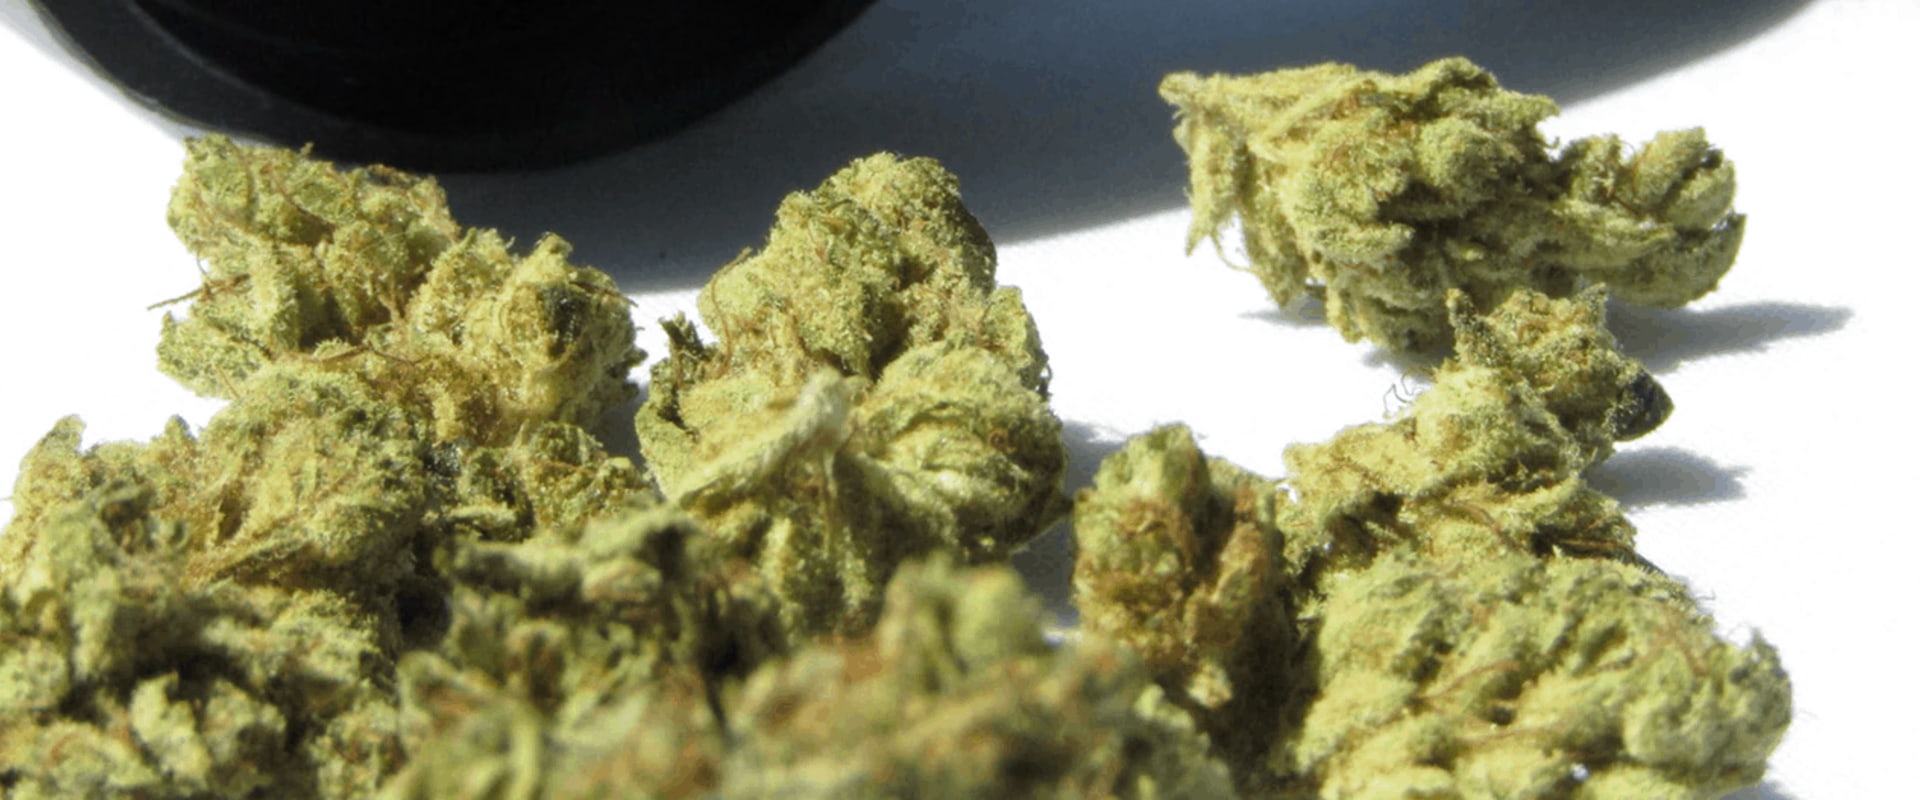 What are the medical benefits of thc-o?